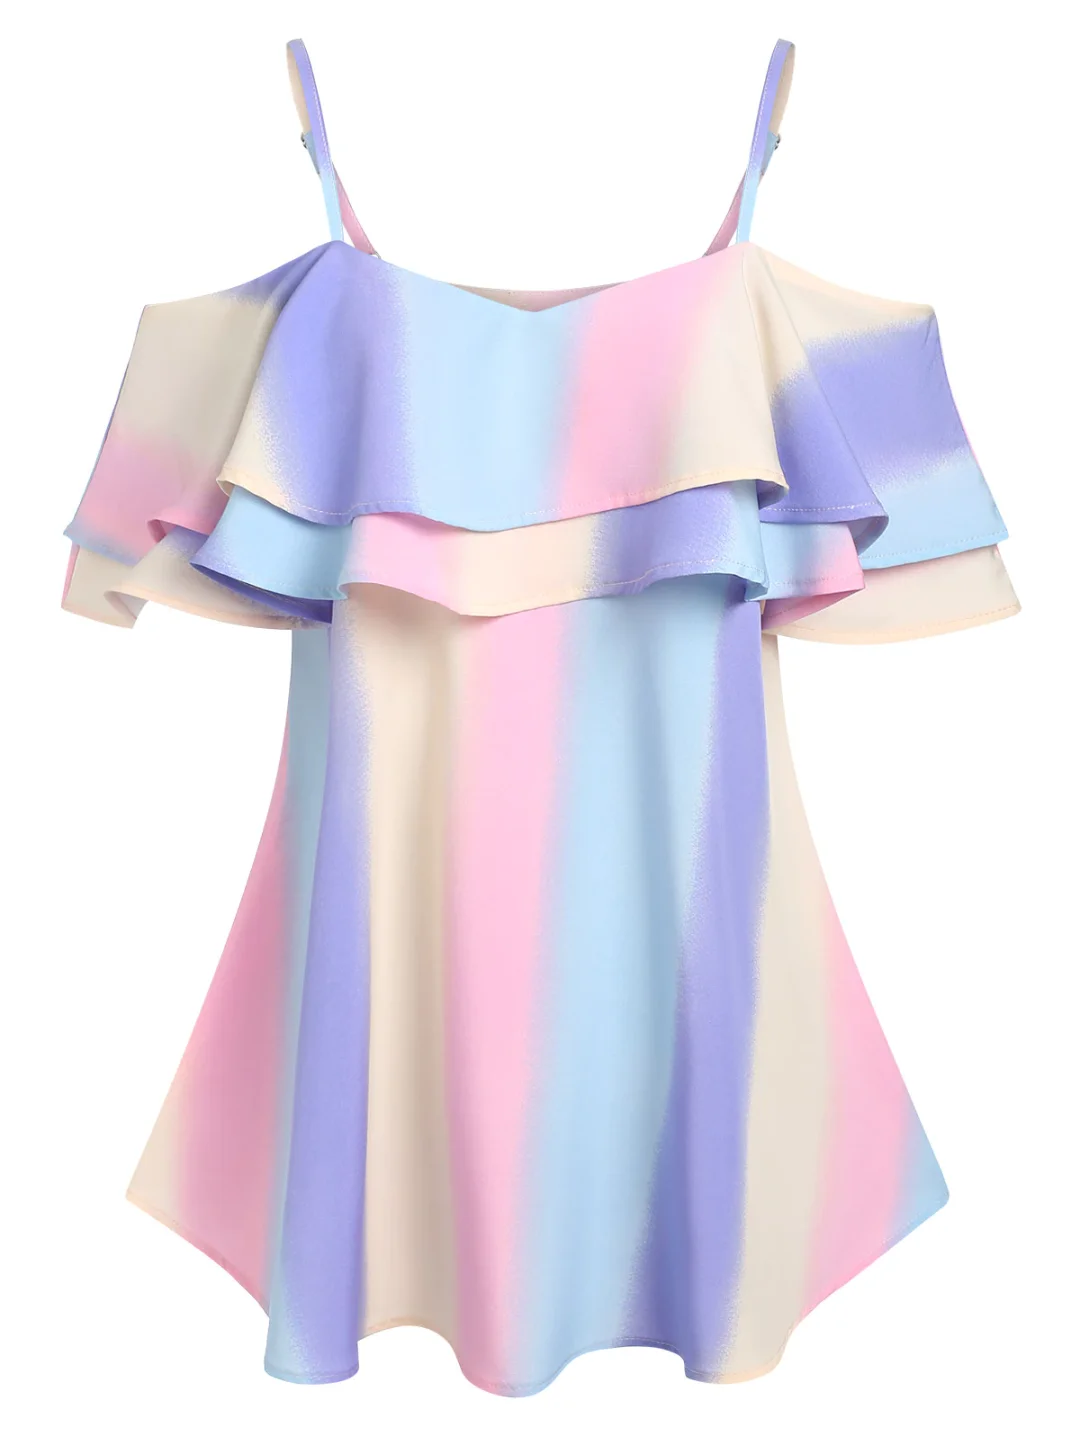 Jangj Shoulder Pastel Color Fairycore Vaccine Top Fancy Like Rainbow Cold Shoulders Ruffled Ombre Color Tee Girl Summer T-Shirts